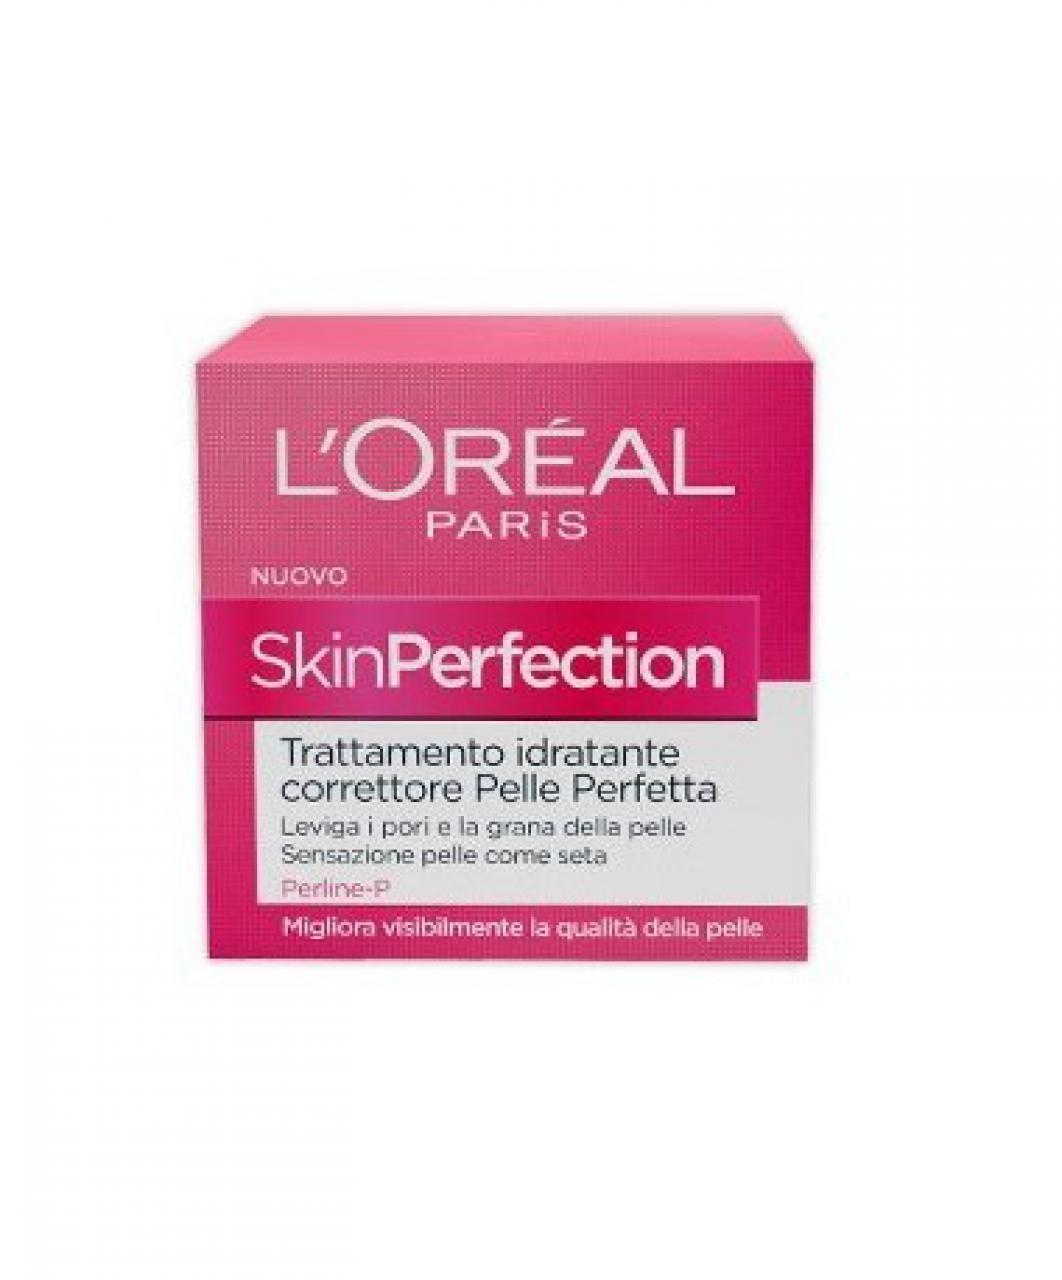 L'oreal skin perfection